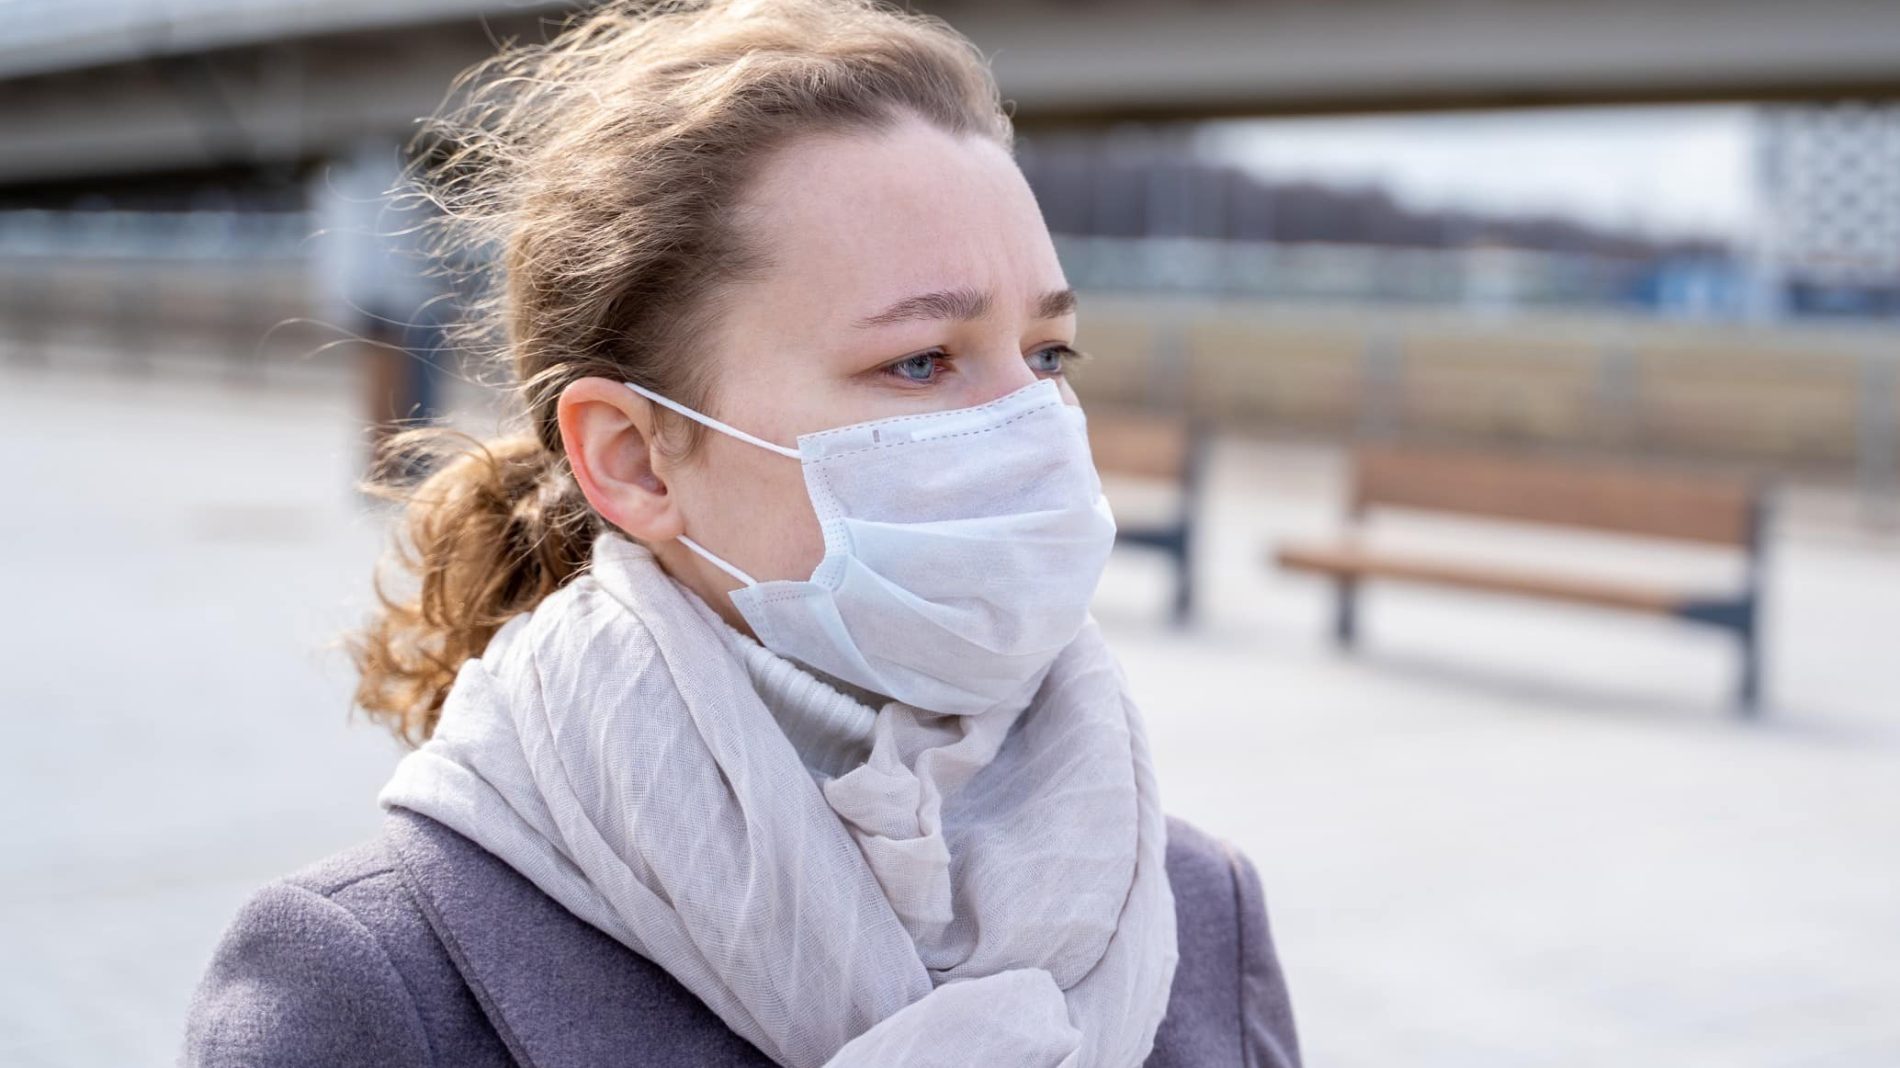 Young person outside with a facemask on